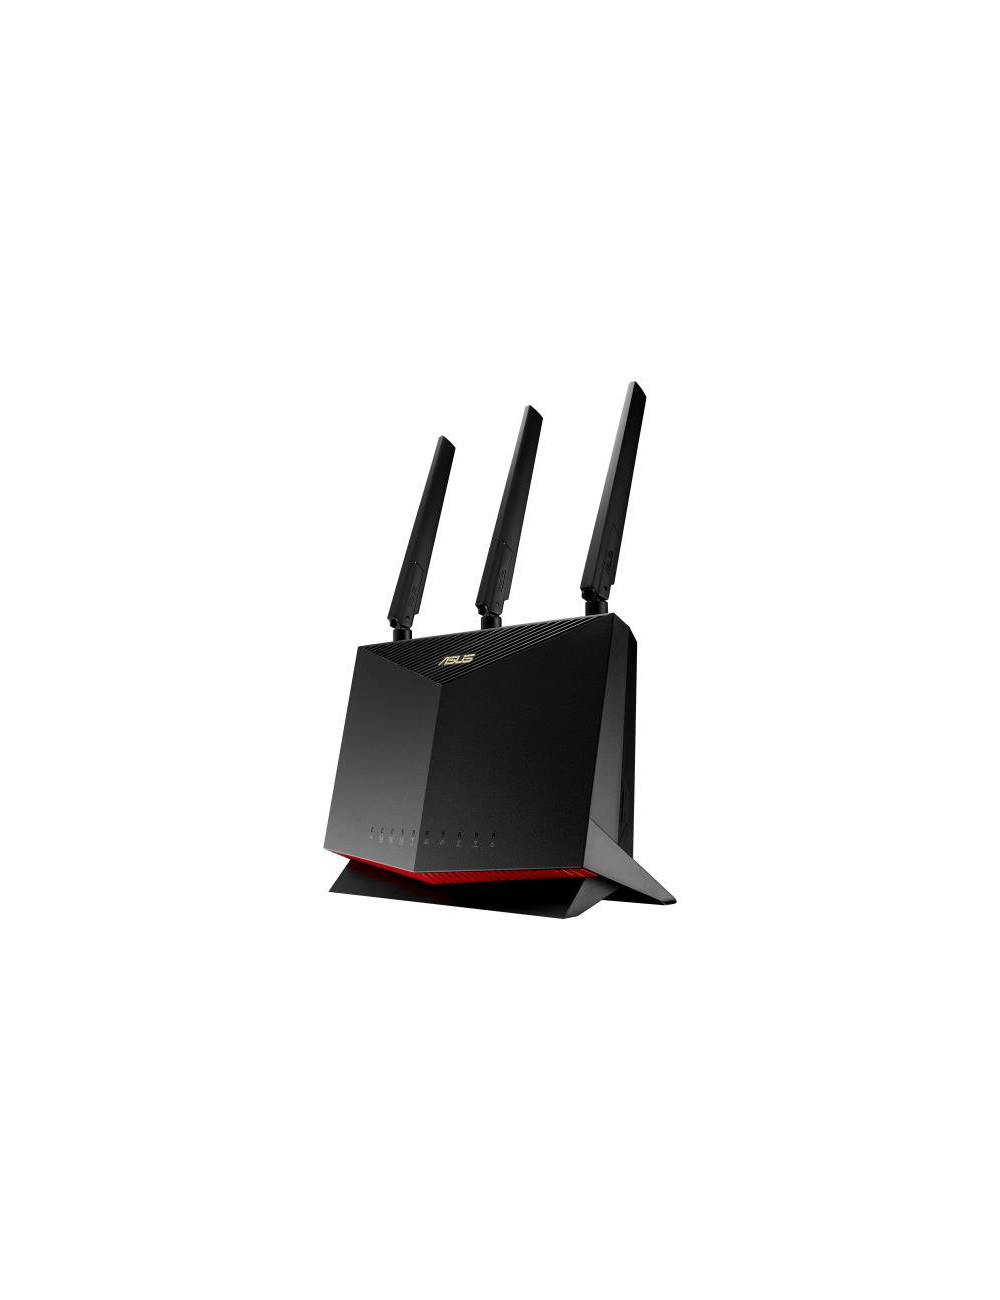 Wireless Router|ASUS|Wireless Router|2600 Mbps|Wi-Fi 5|USB 2.0|1 WAN|4x10/100/1000M|Number of antennas 4|4G-AC86U